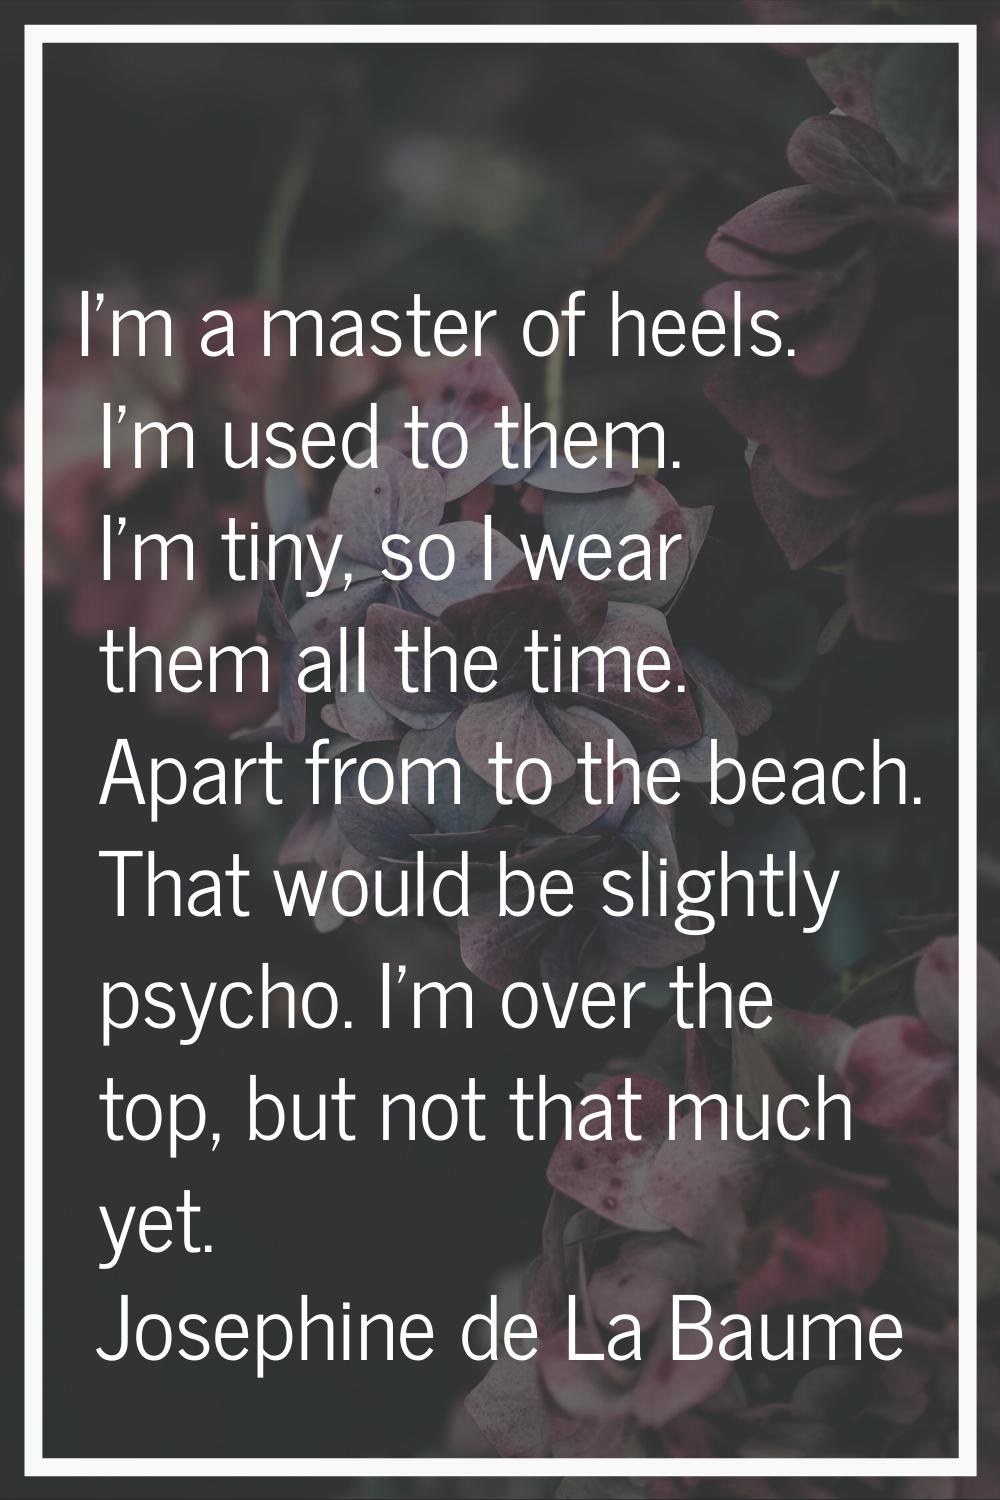 I'm a master of heels. I'm used to them. I'm tiny, so I wear them all the time. Apart from to the b